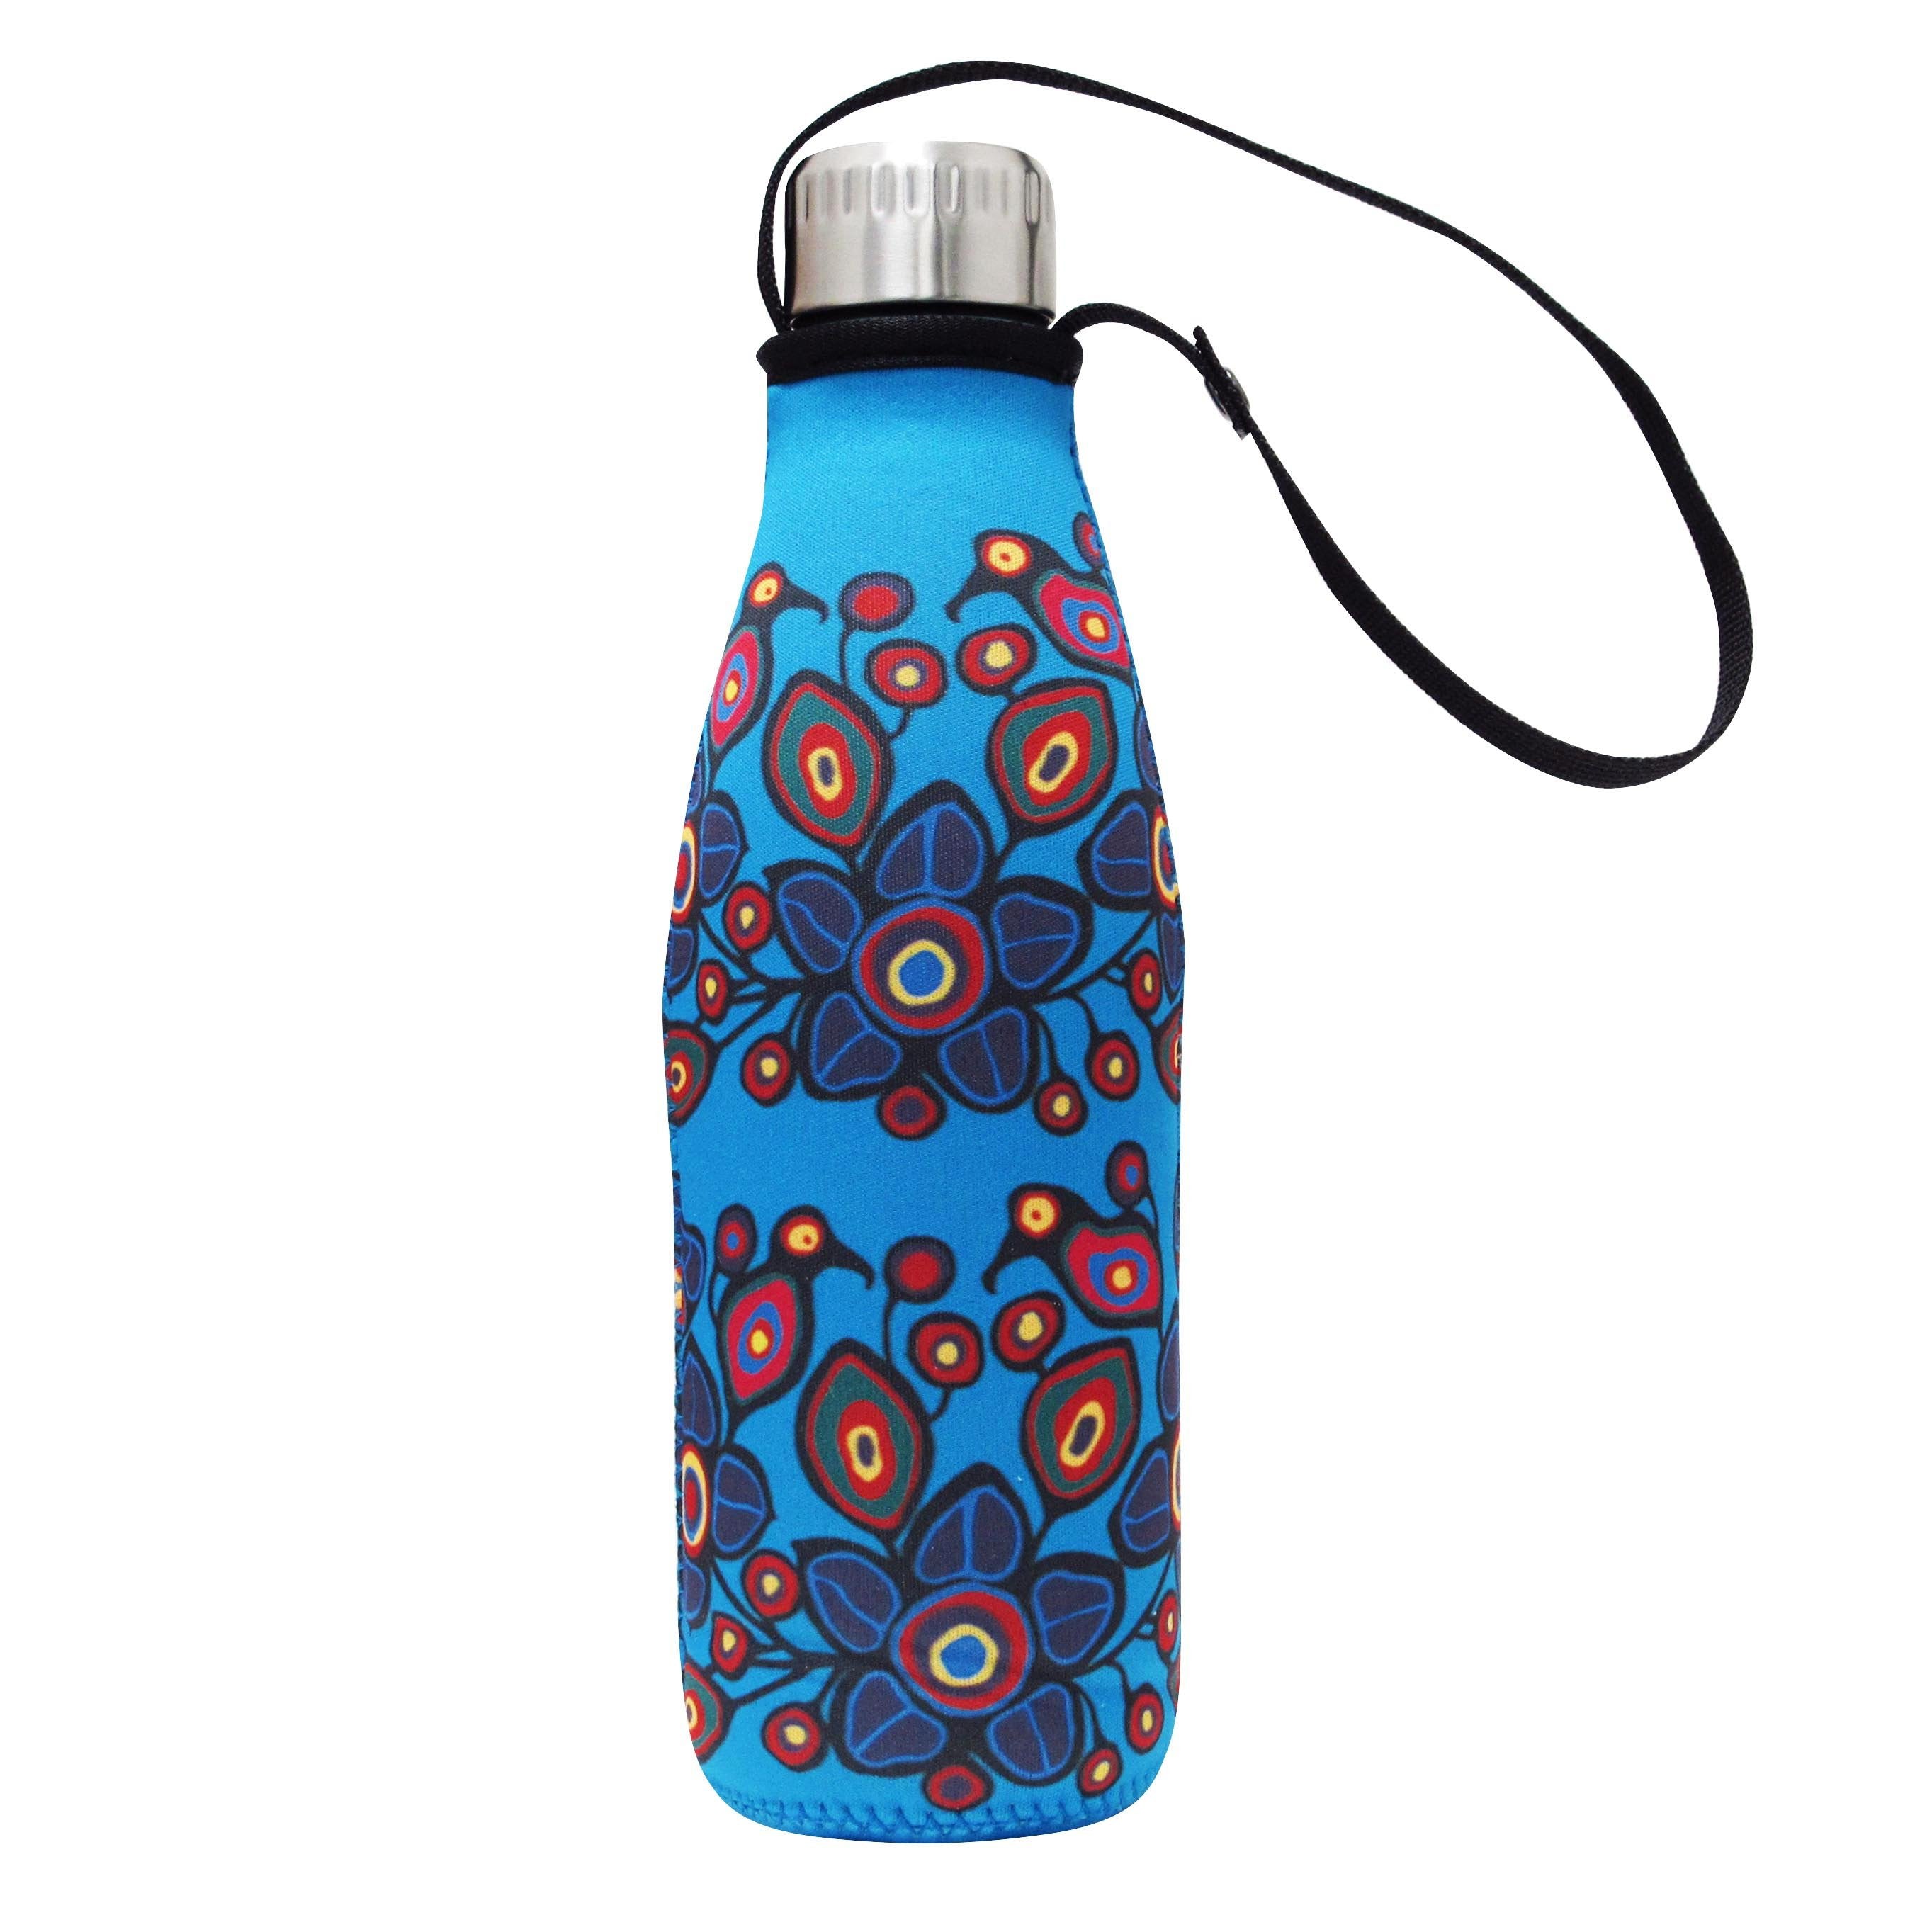 Norval Morrisseau Flowers and Birds Water Bottle and Sleeve - Oscardo